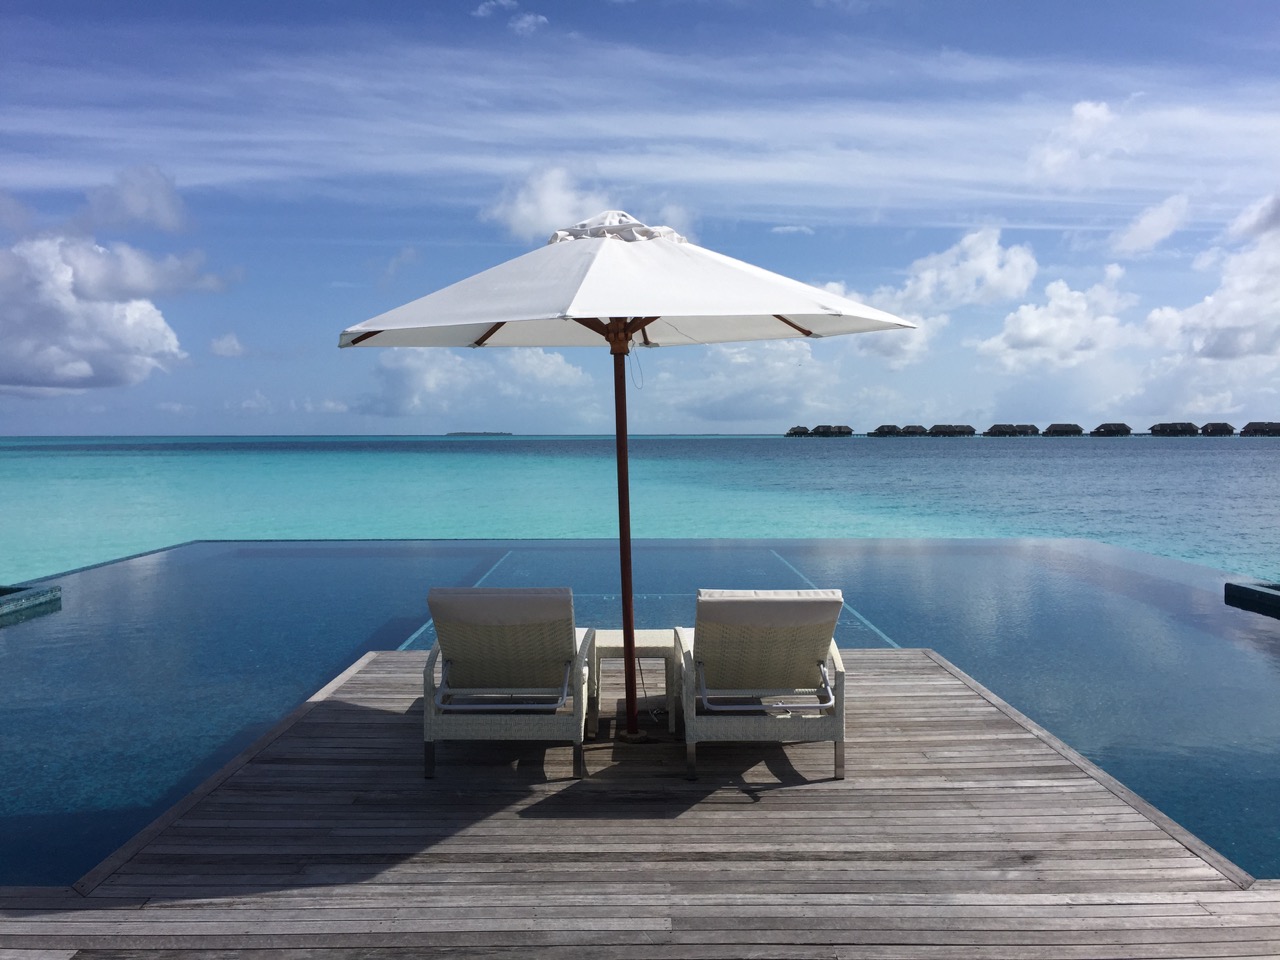 Planning a trip to the Maldives? One of the most exciting experiences I had